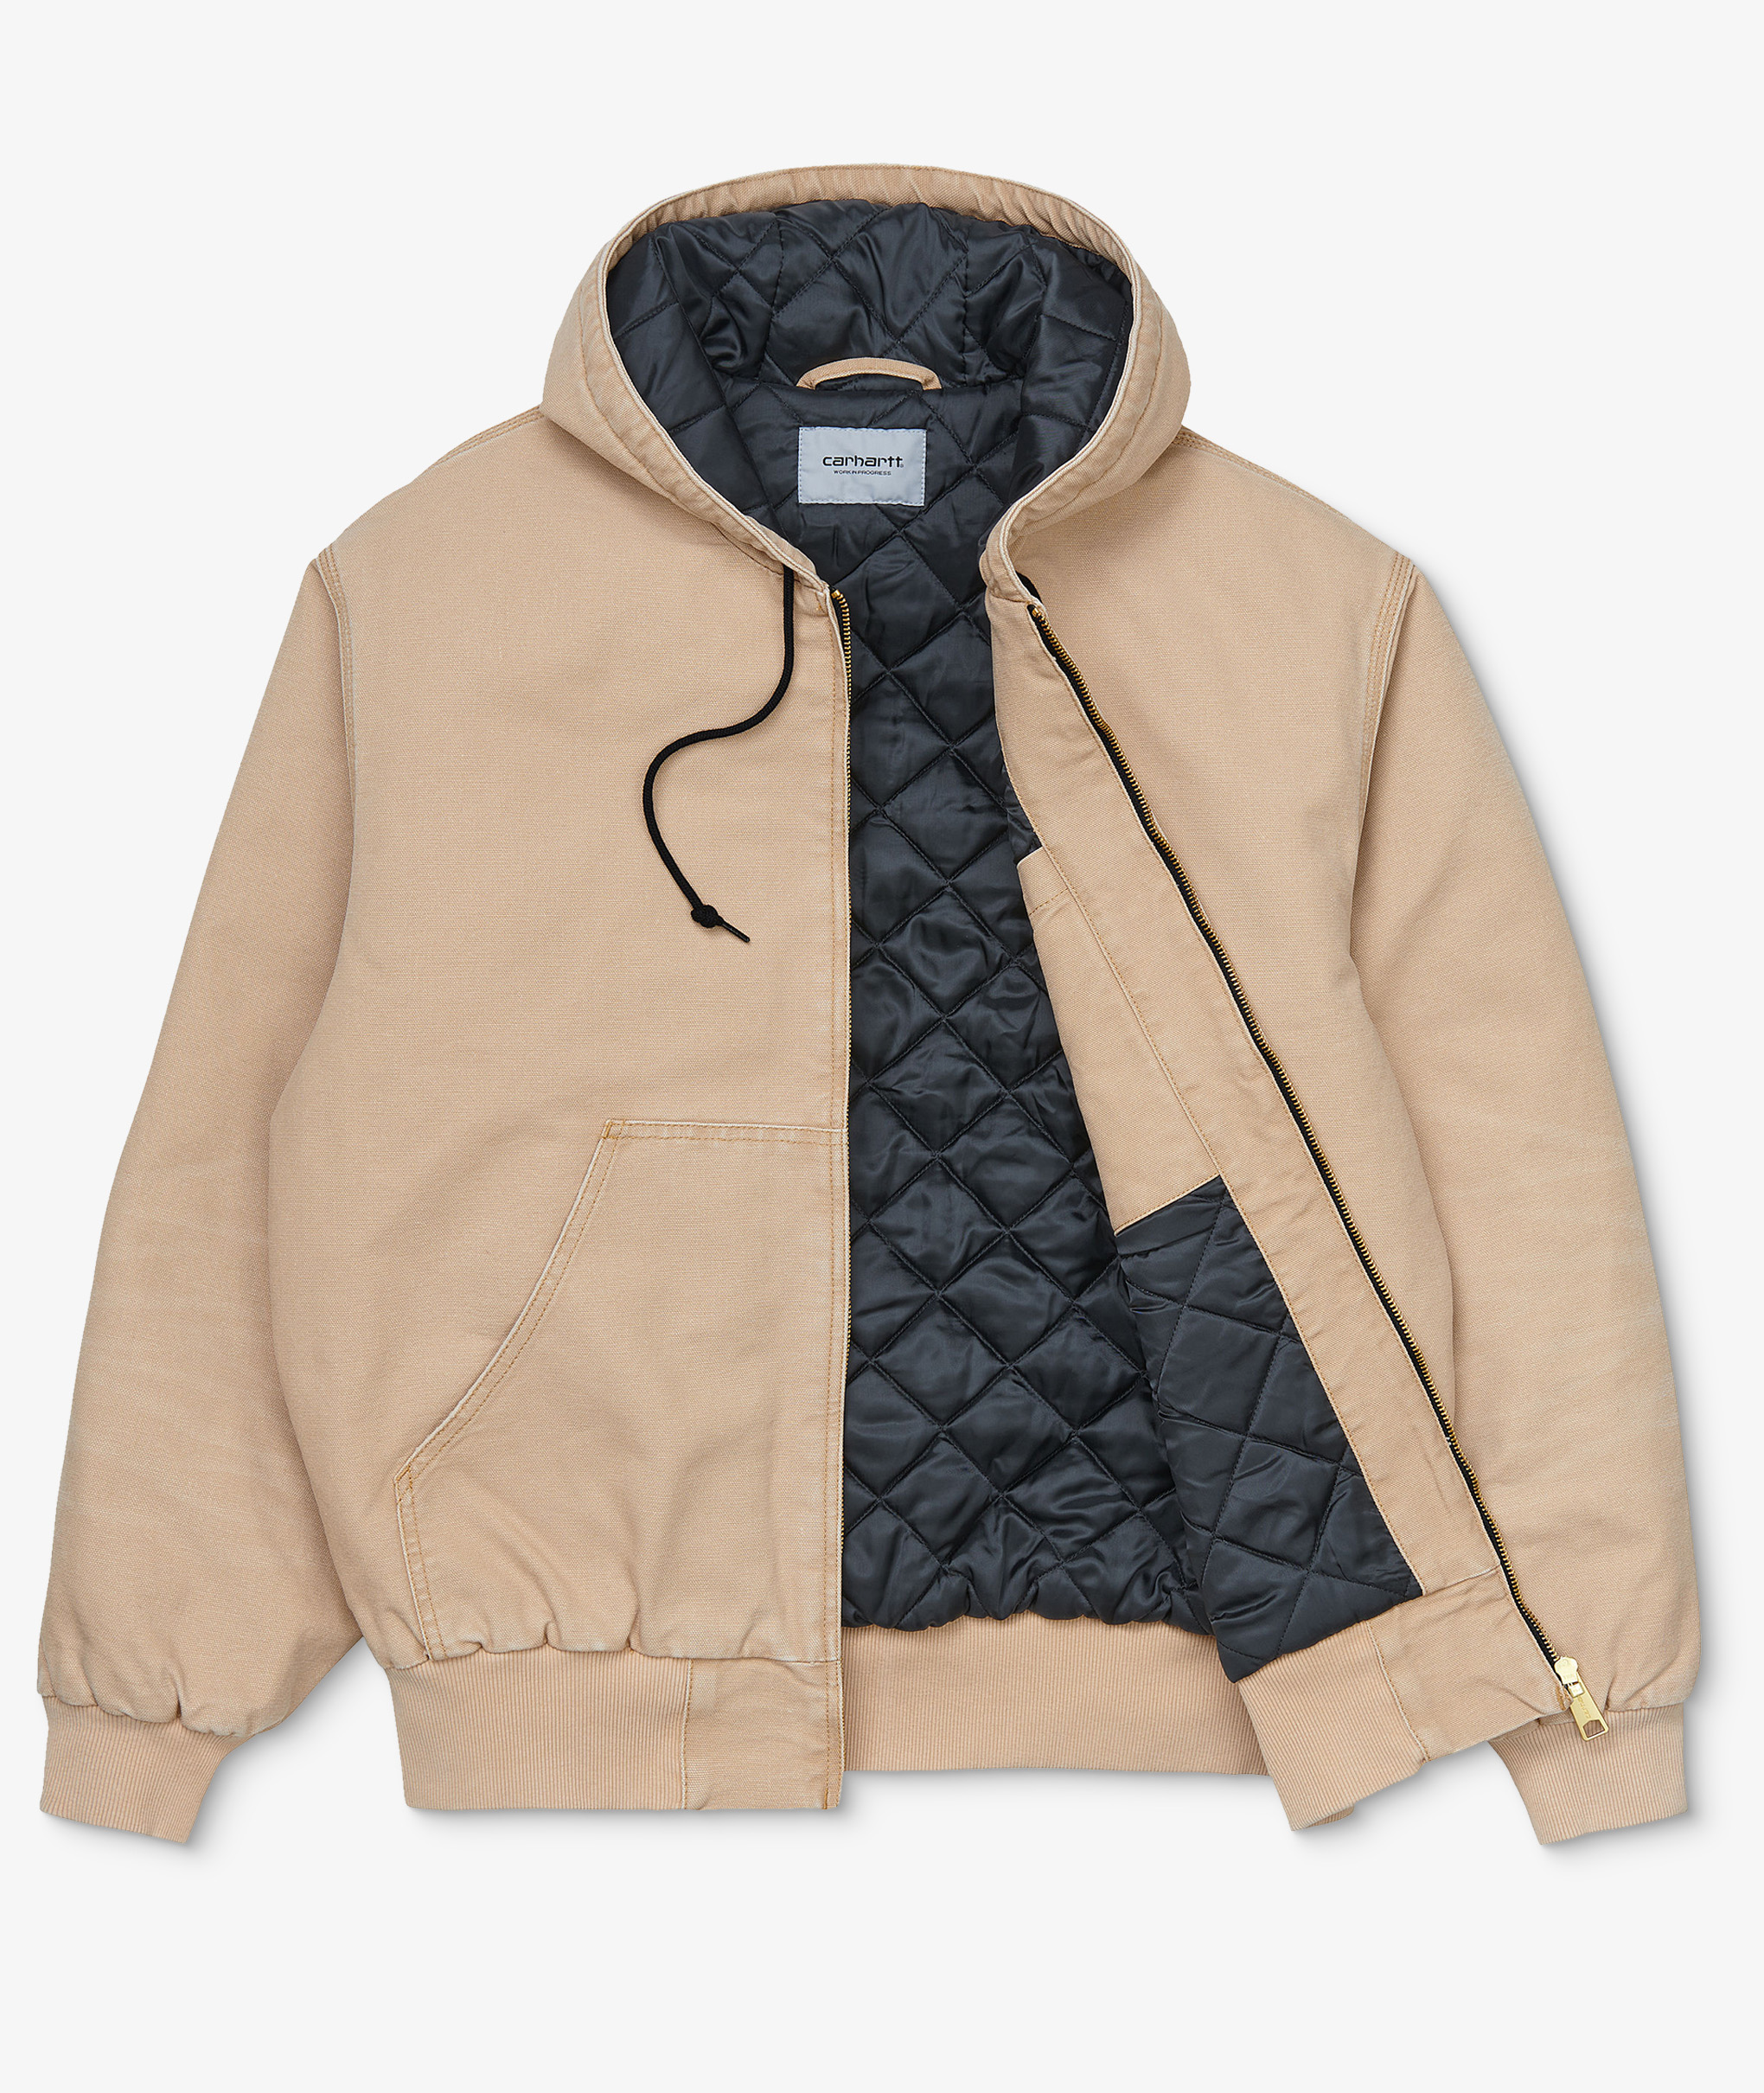 Norse Store  Shipping Worldwide - Carhartt WIP OG Active Jacket - Dusty H  Brown